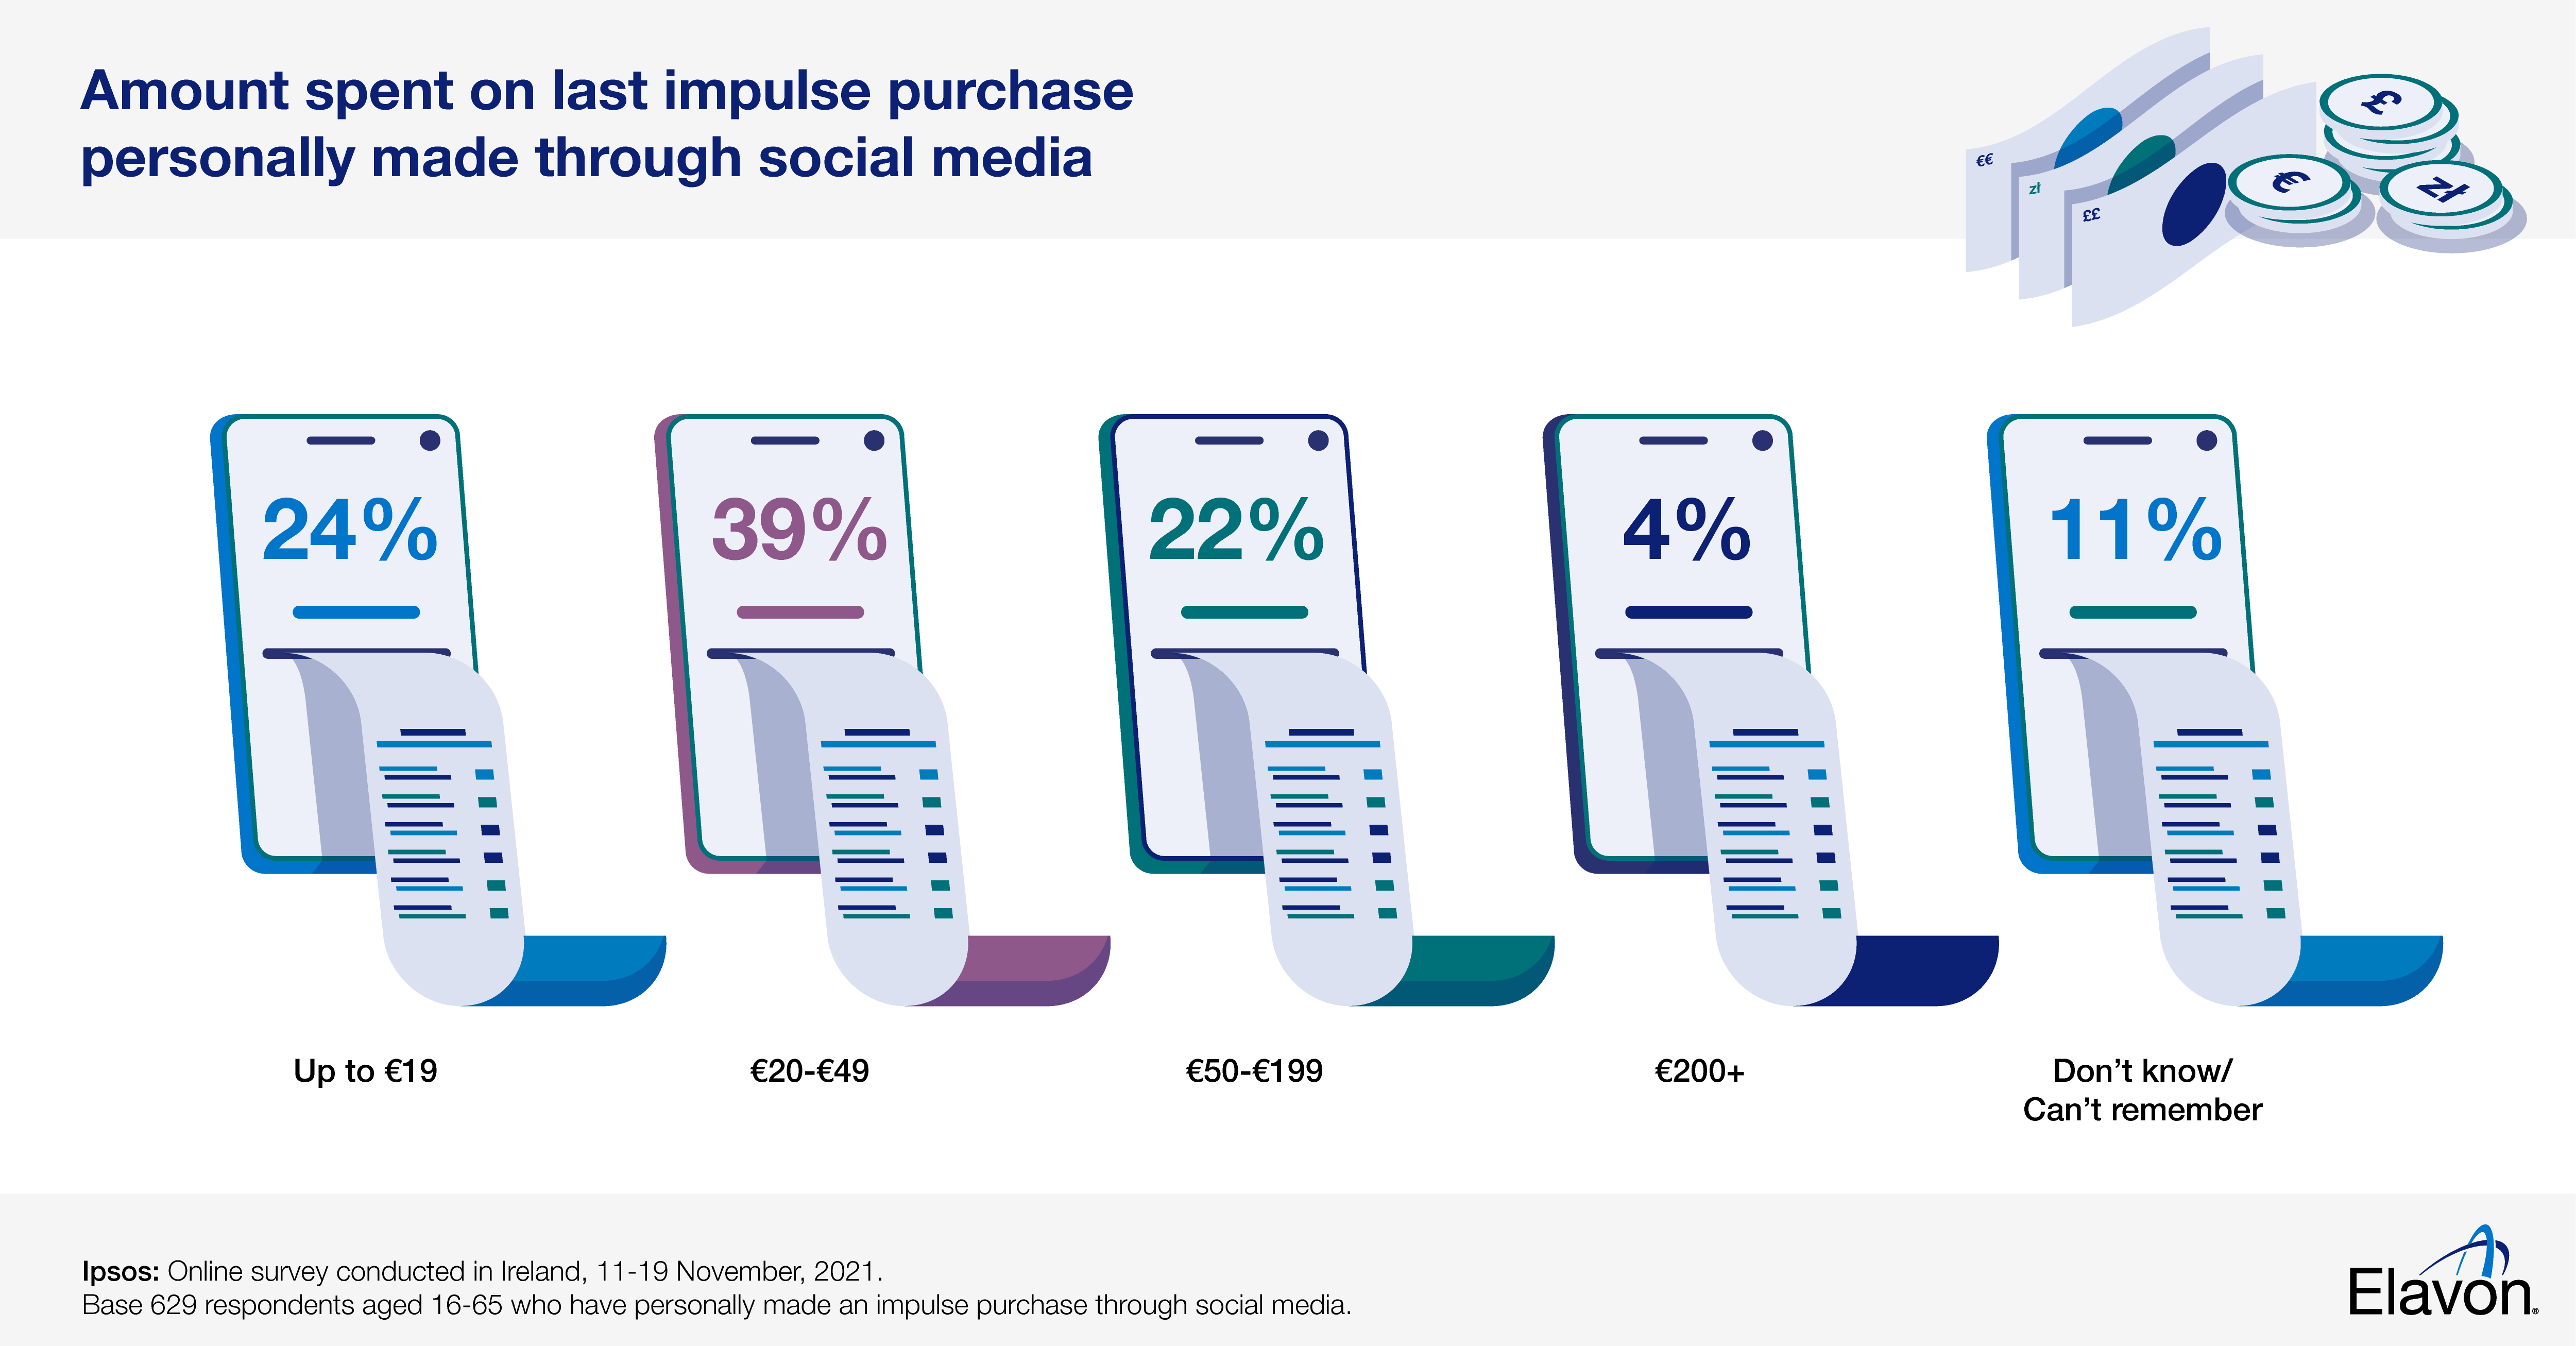 Amount spent on last impulse purchase personally made through social media